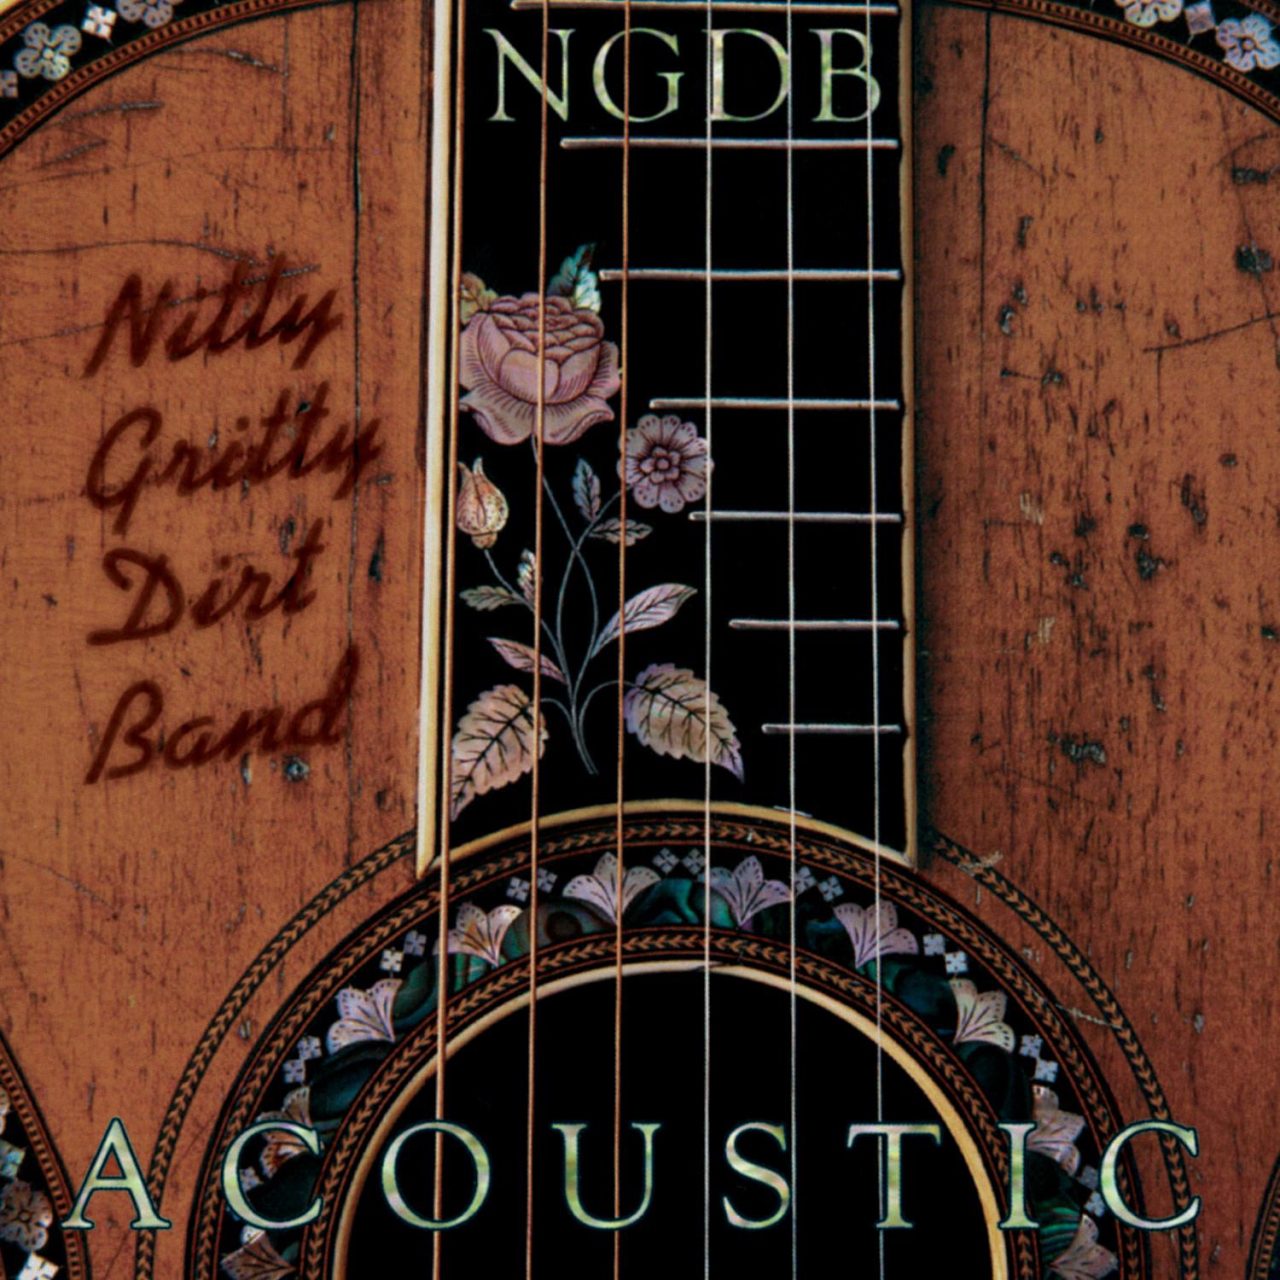 Nitty Gritty Dirt Band – Acoustic cover album